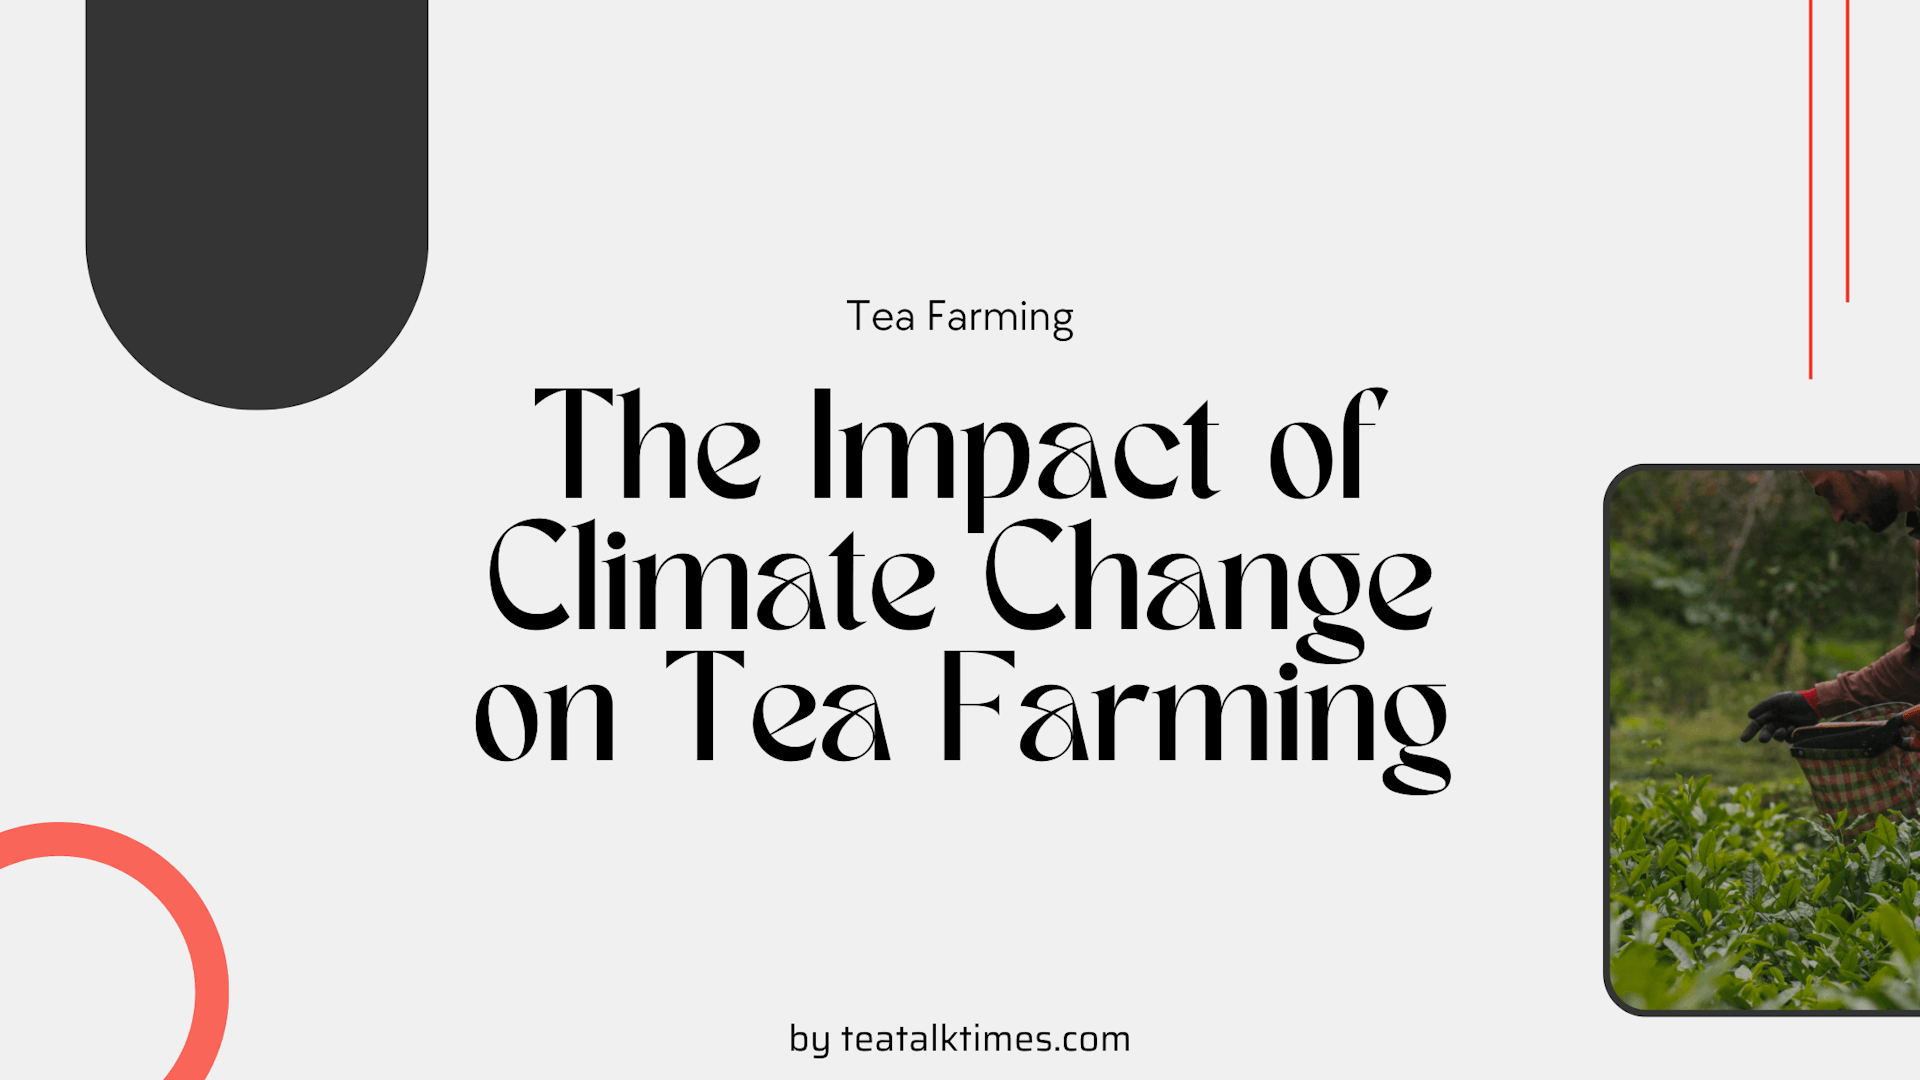 The Impact of Climate Change on Tea Farming